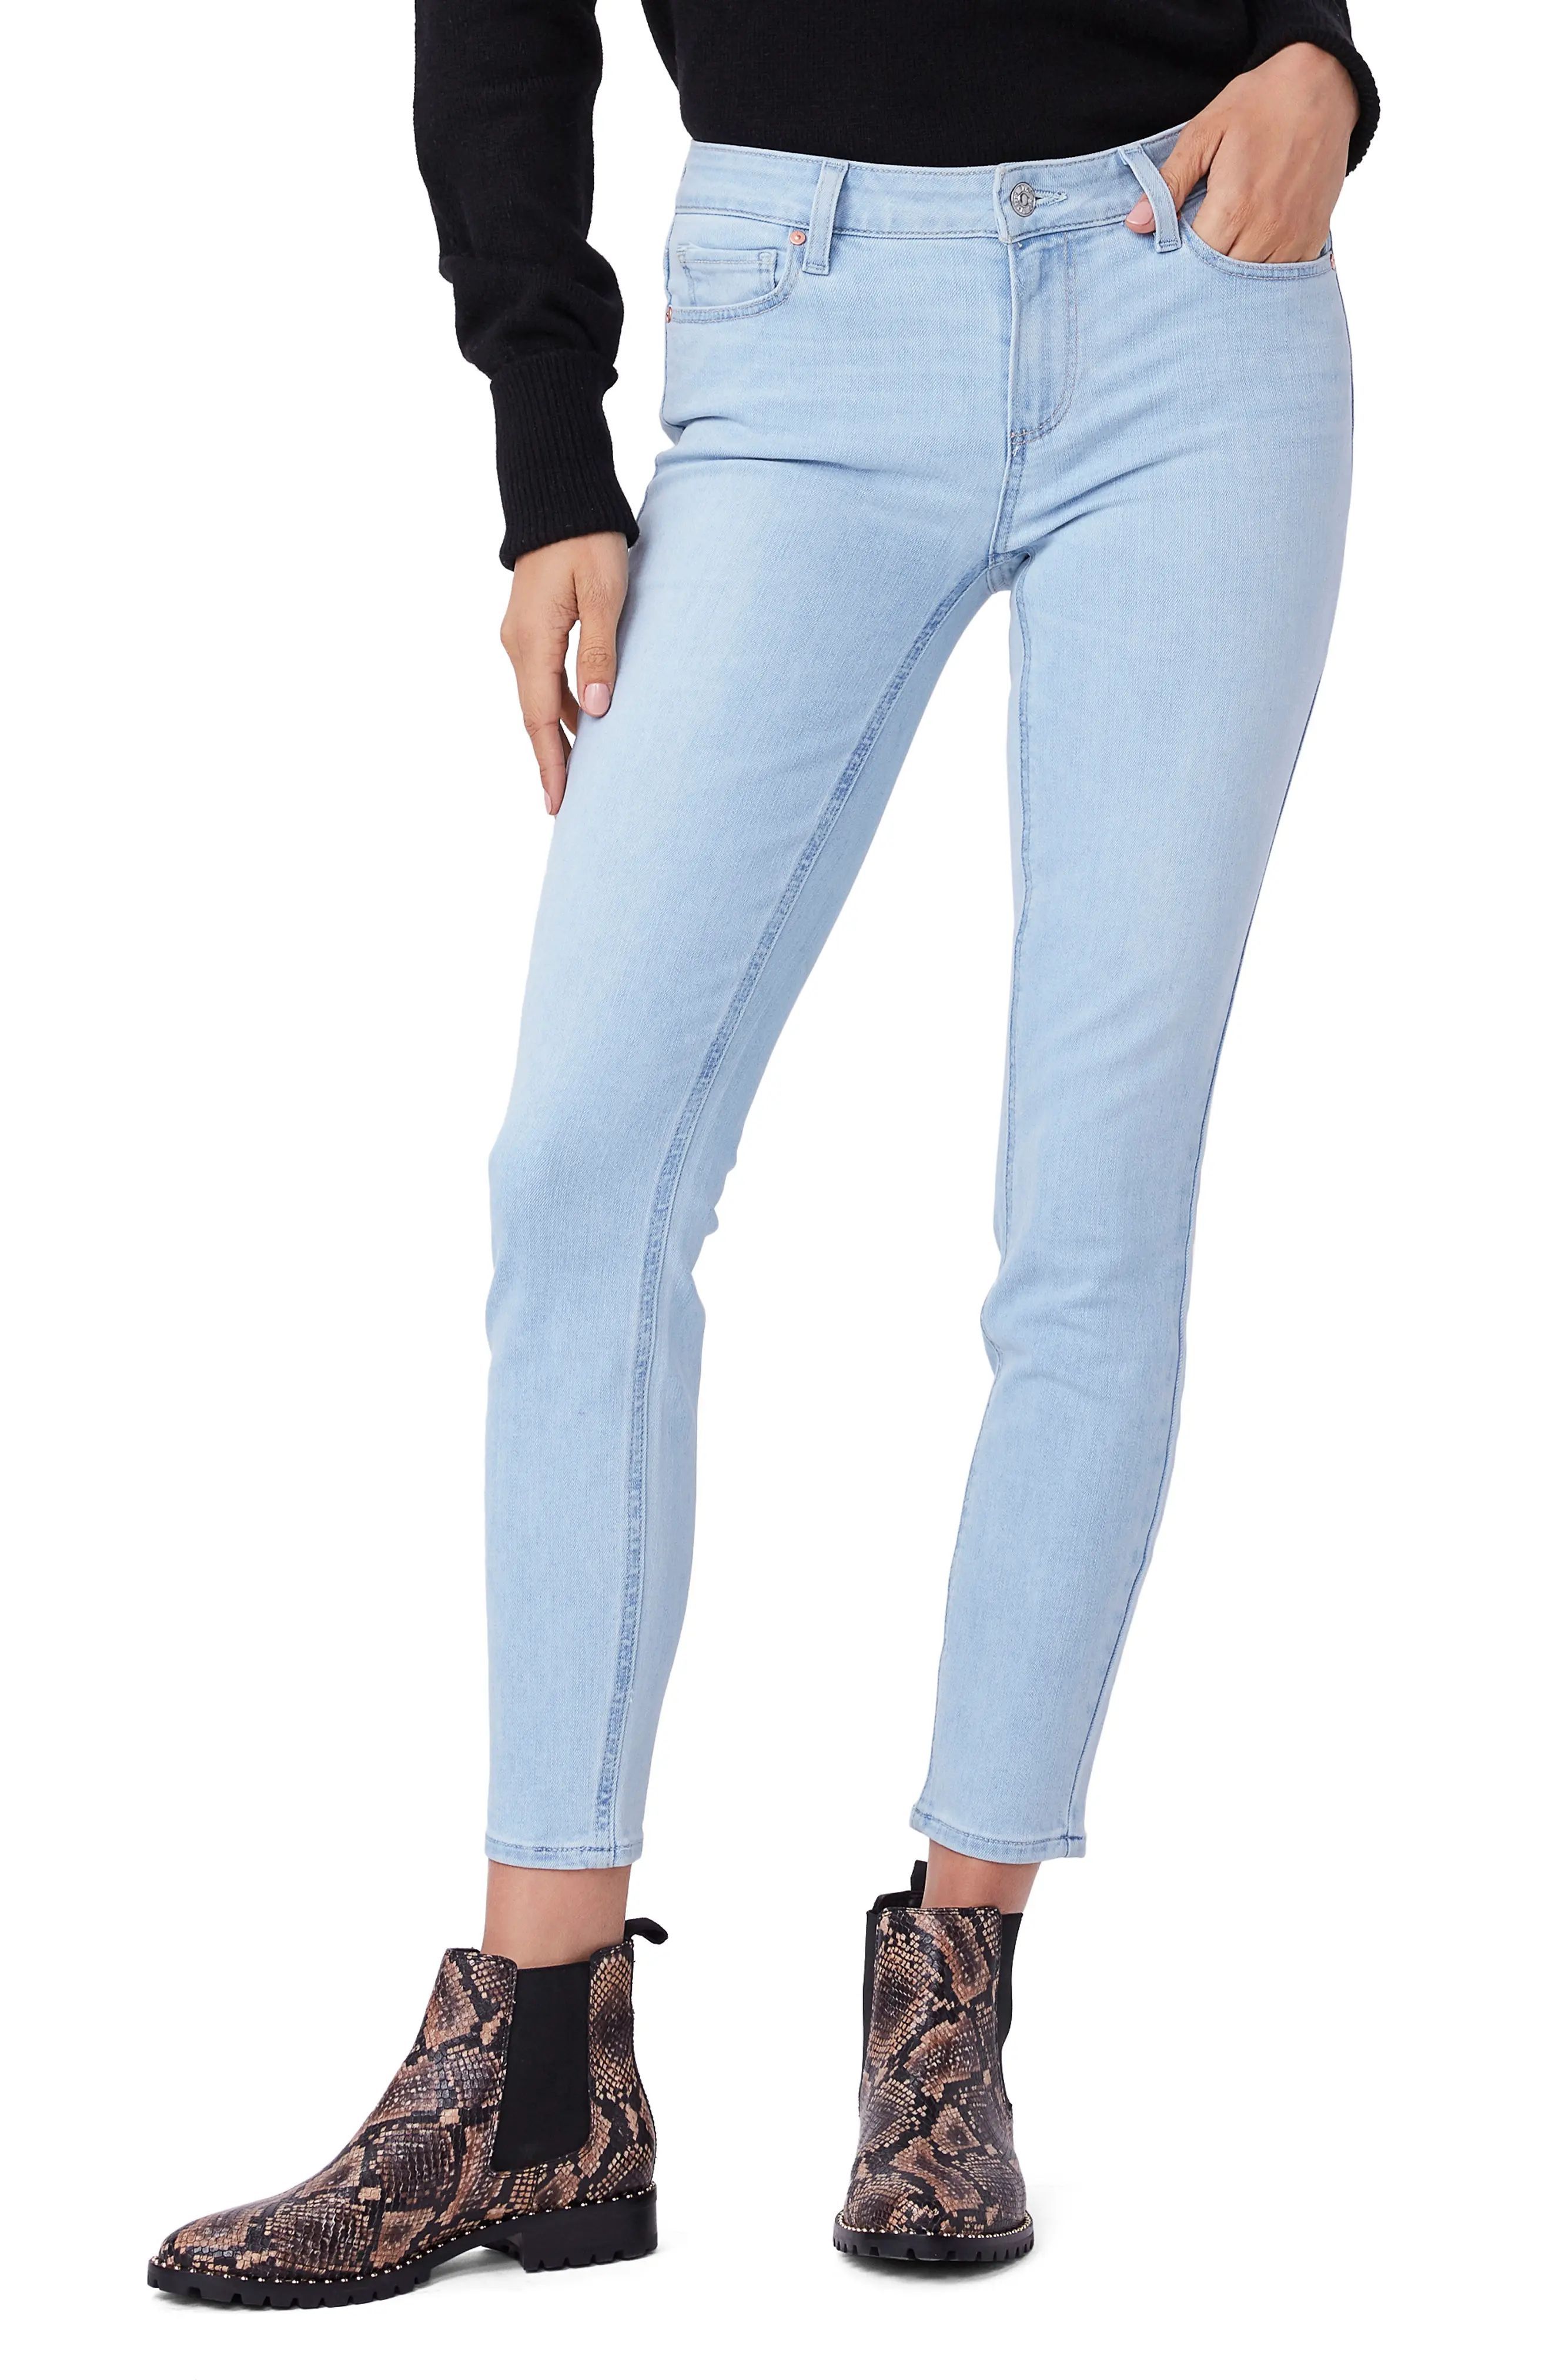 Women's Paige Verdugo Ankle Skinny Jeans, Size 32 - Blue | Nordstrom